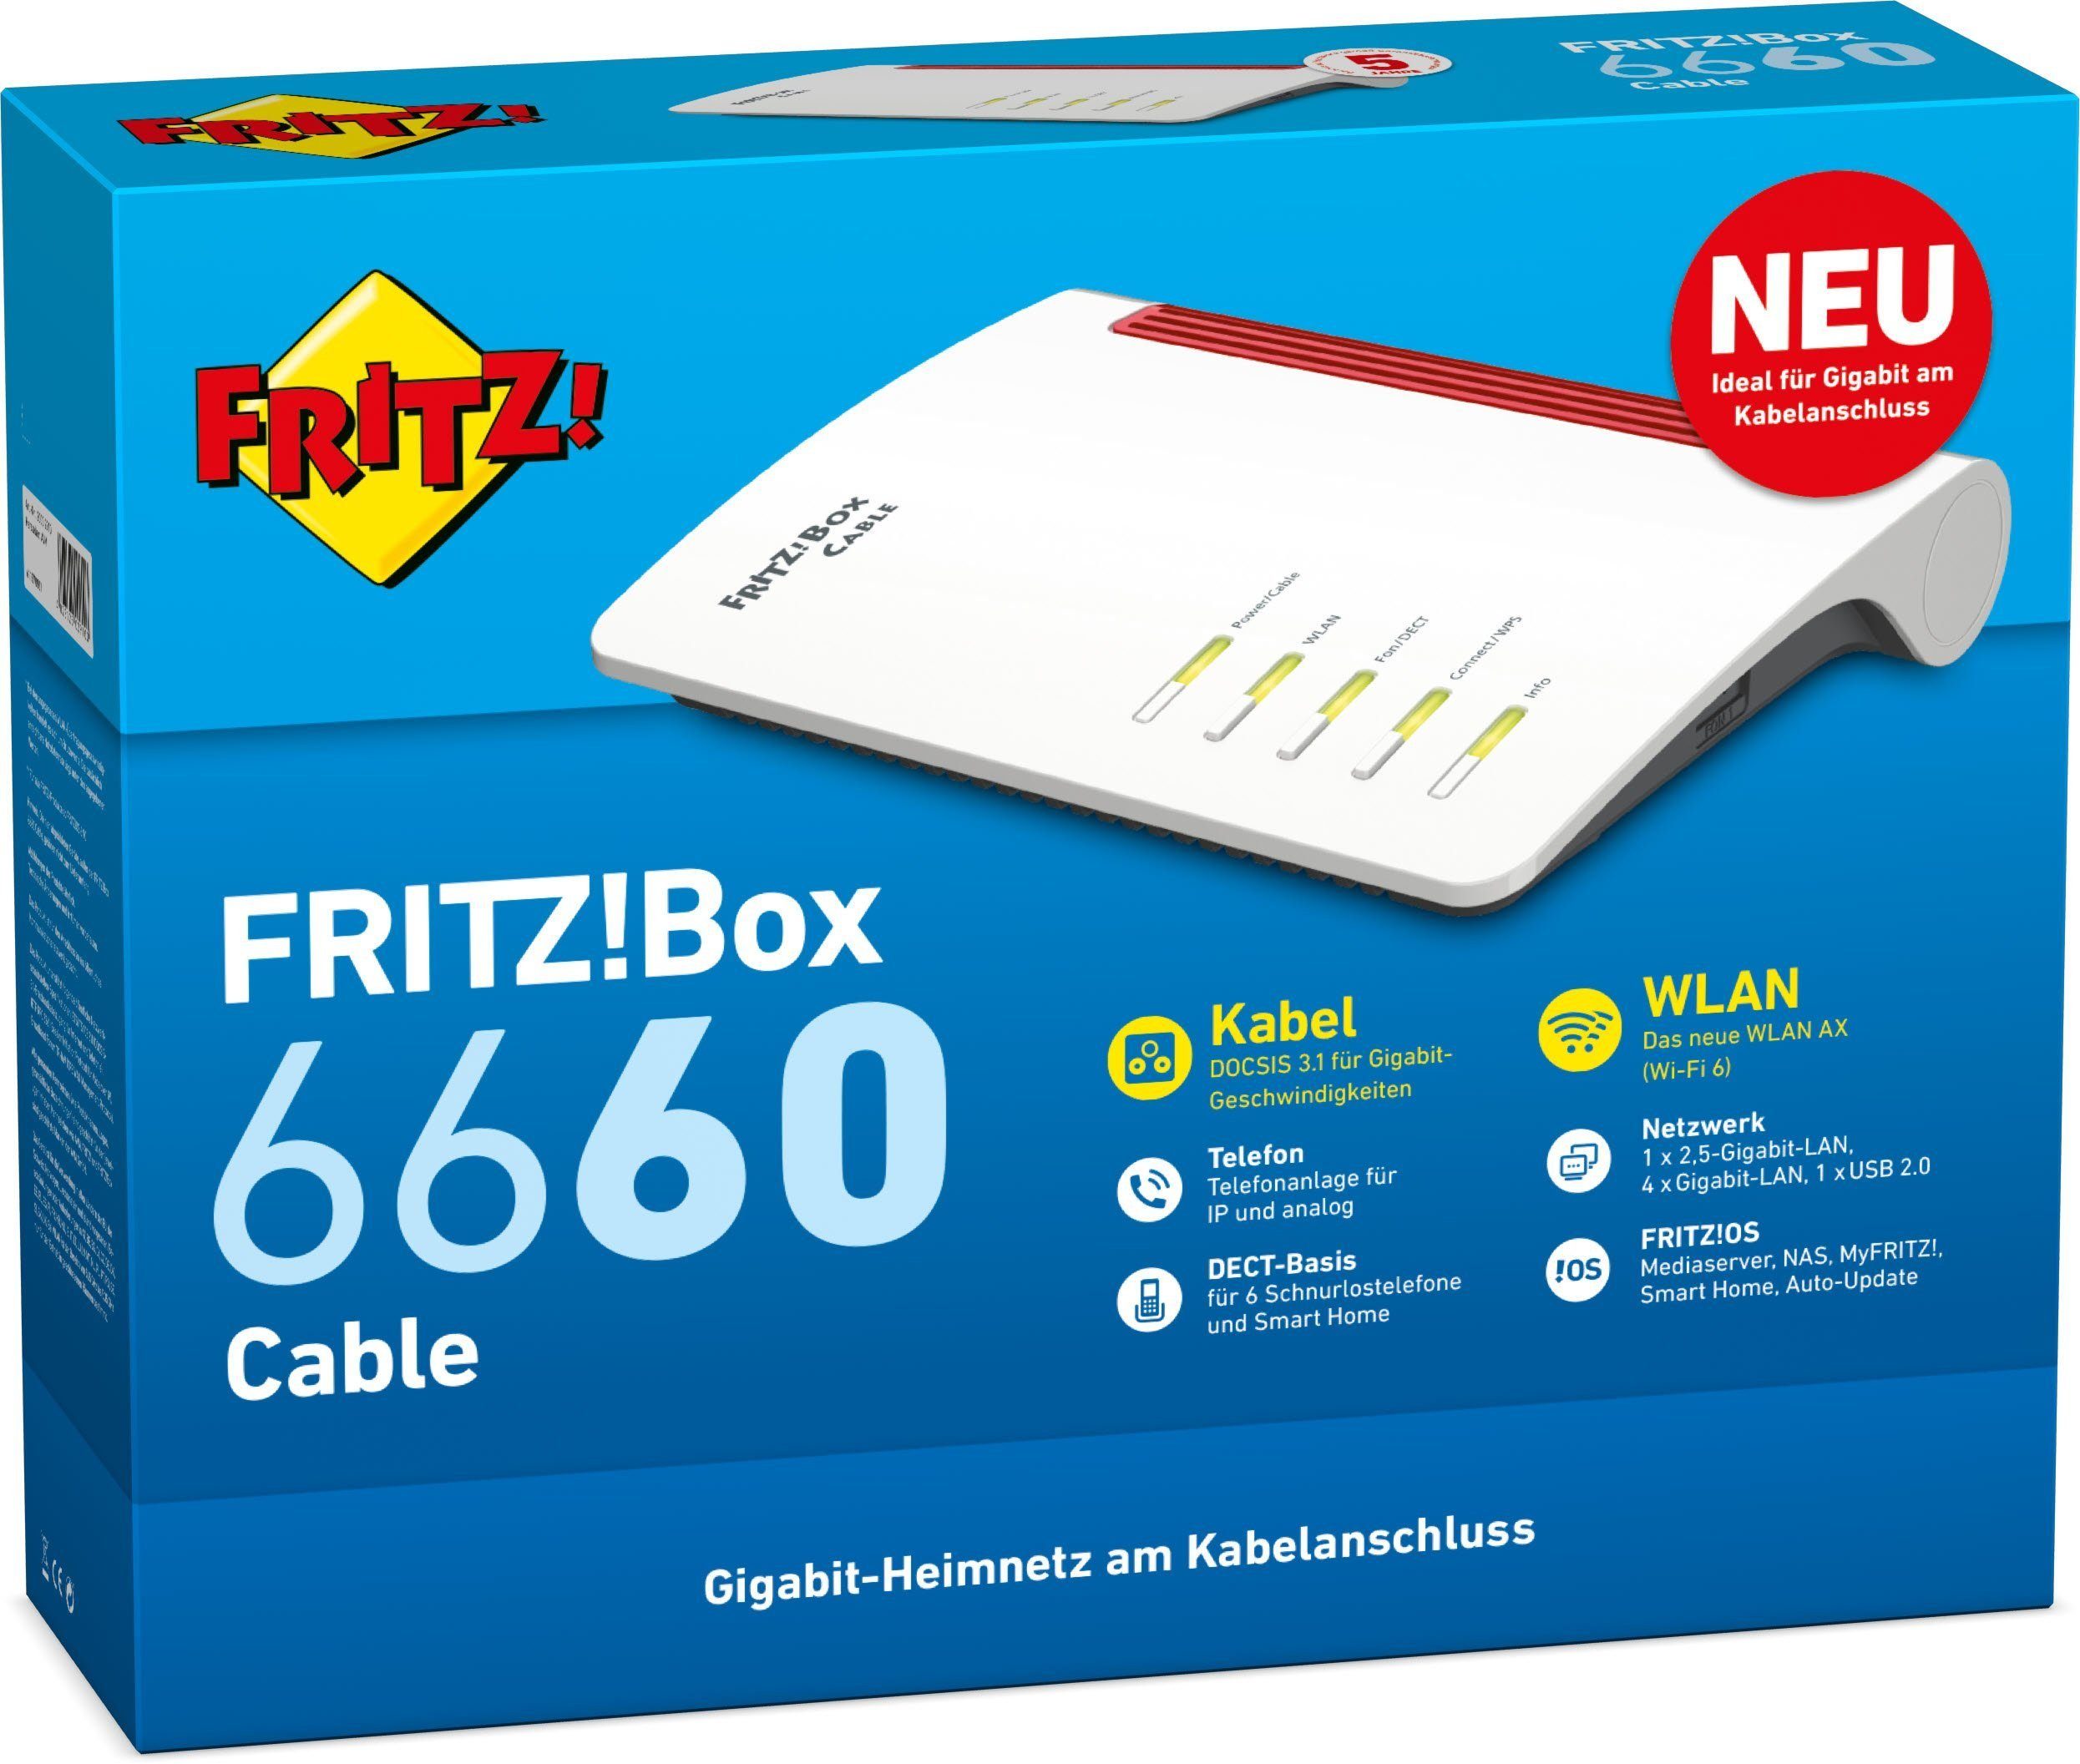 Cable WLAN-Router AVM FRITZ!Box 6660